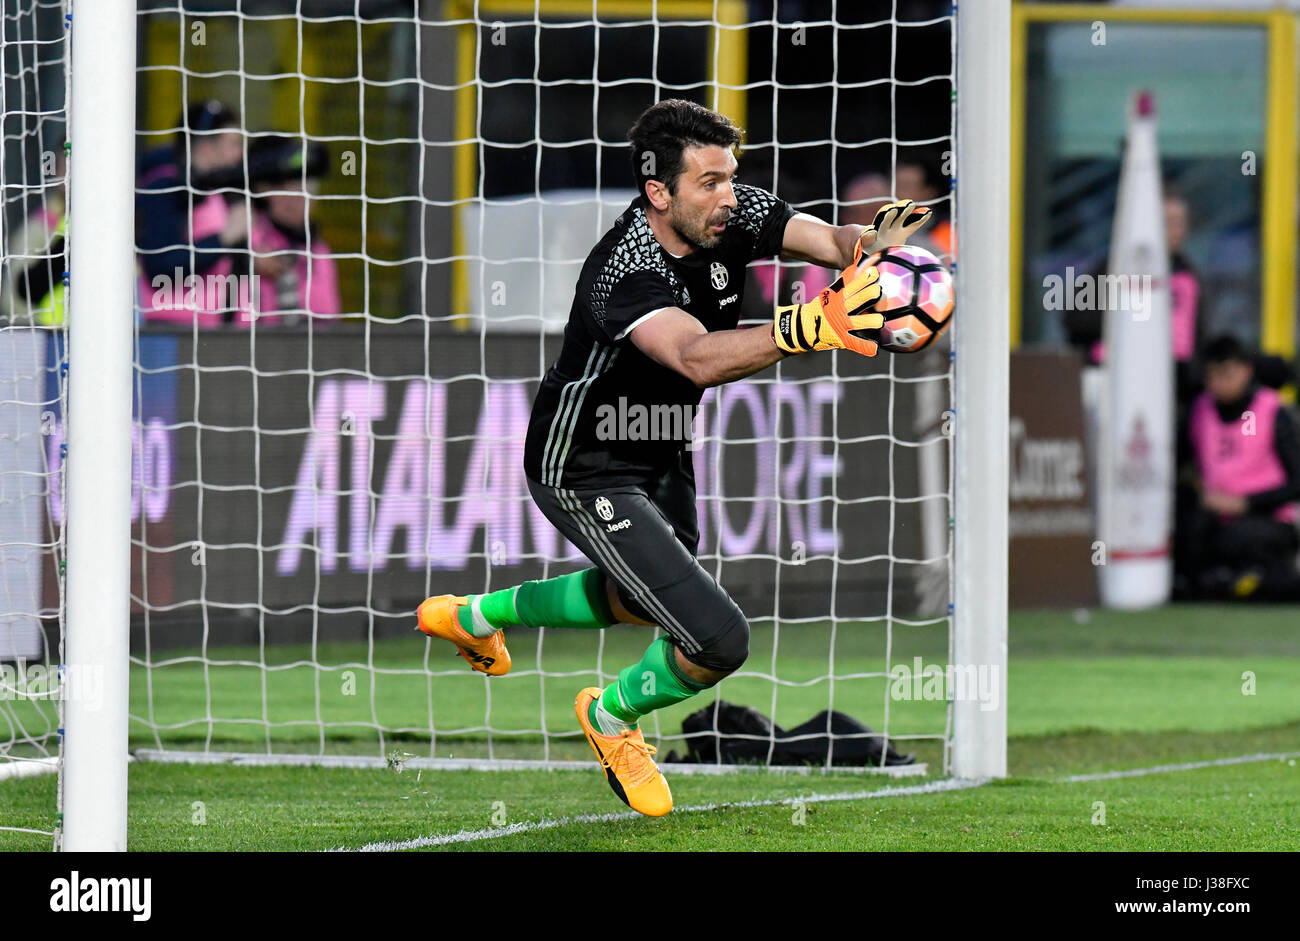 Football goalkeeper saves the ball during a professional match, in Italy. Stock Photo